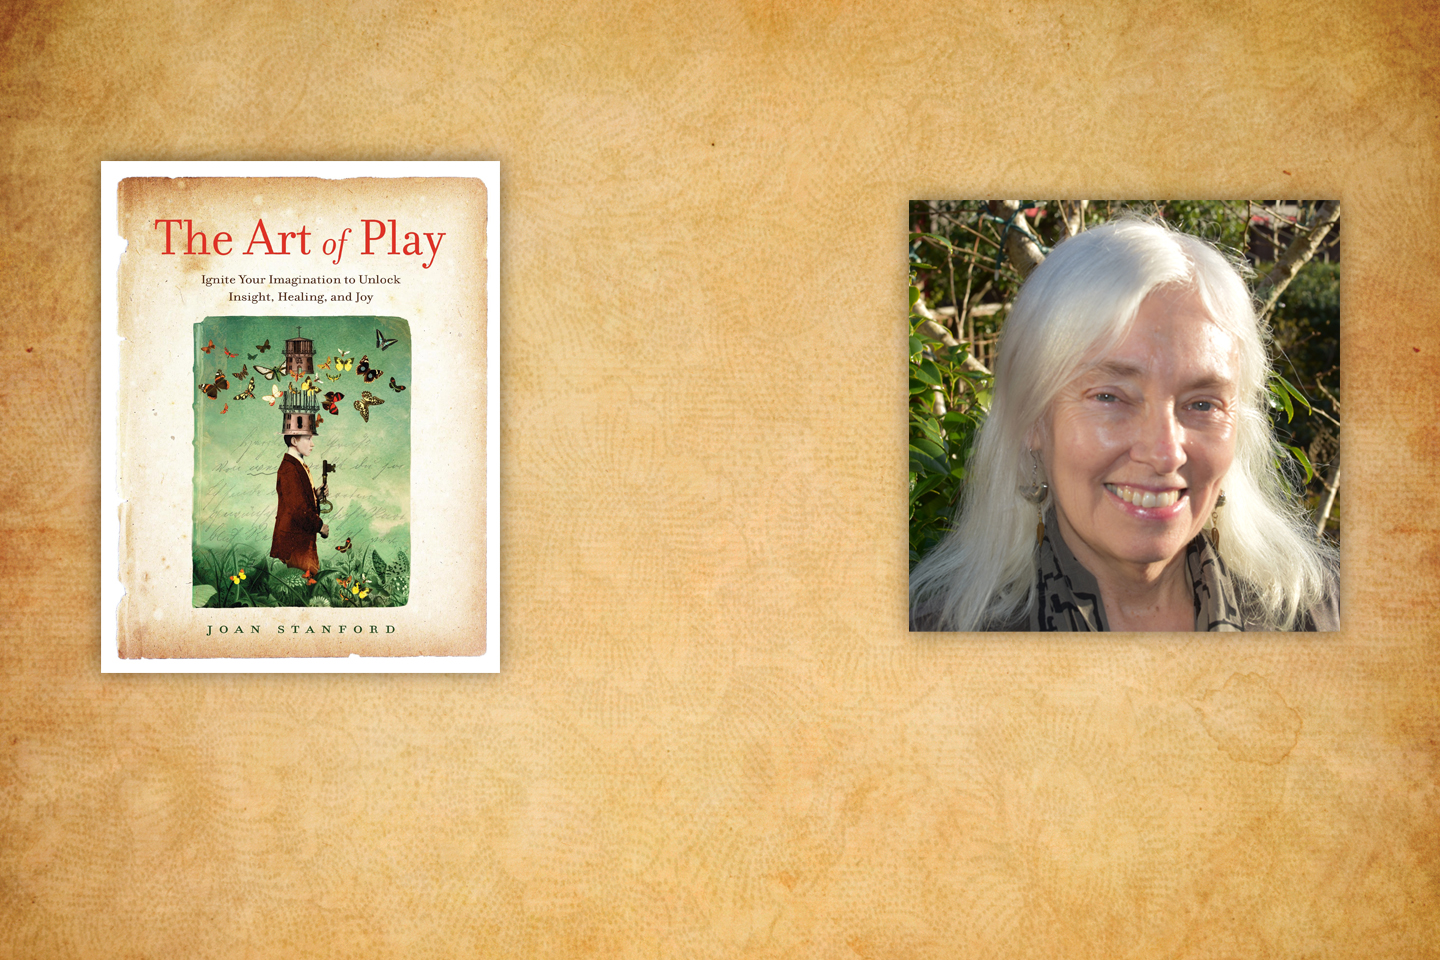 The Art of Play by Joan Stanford - IN STORES NOW